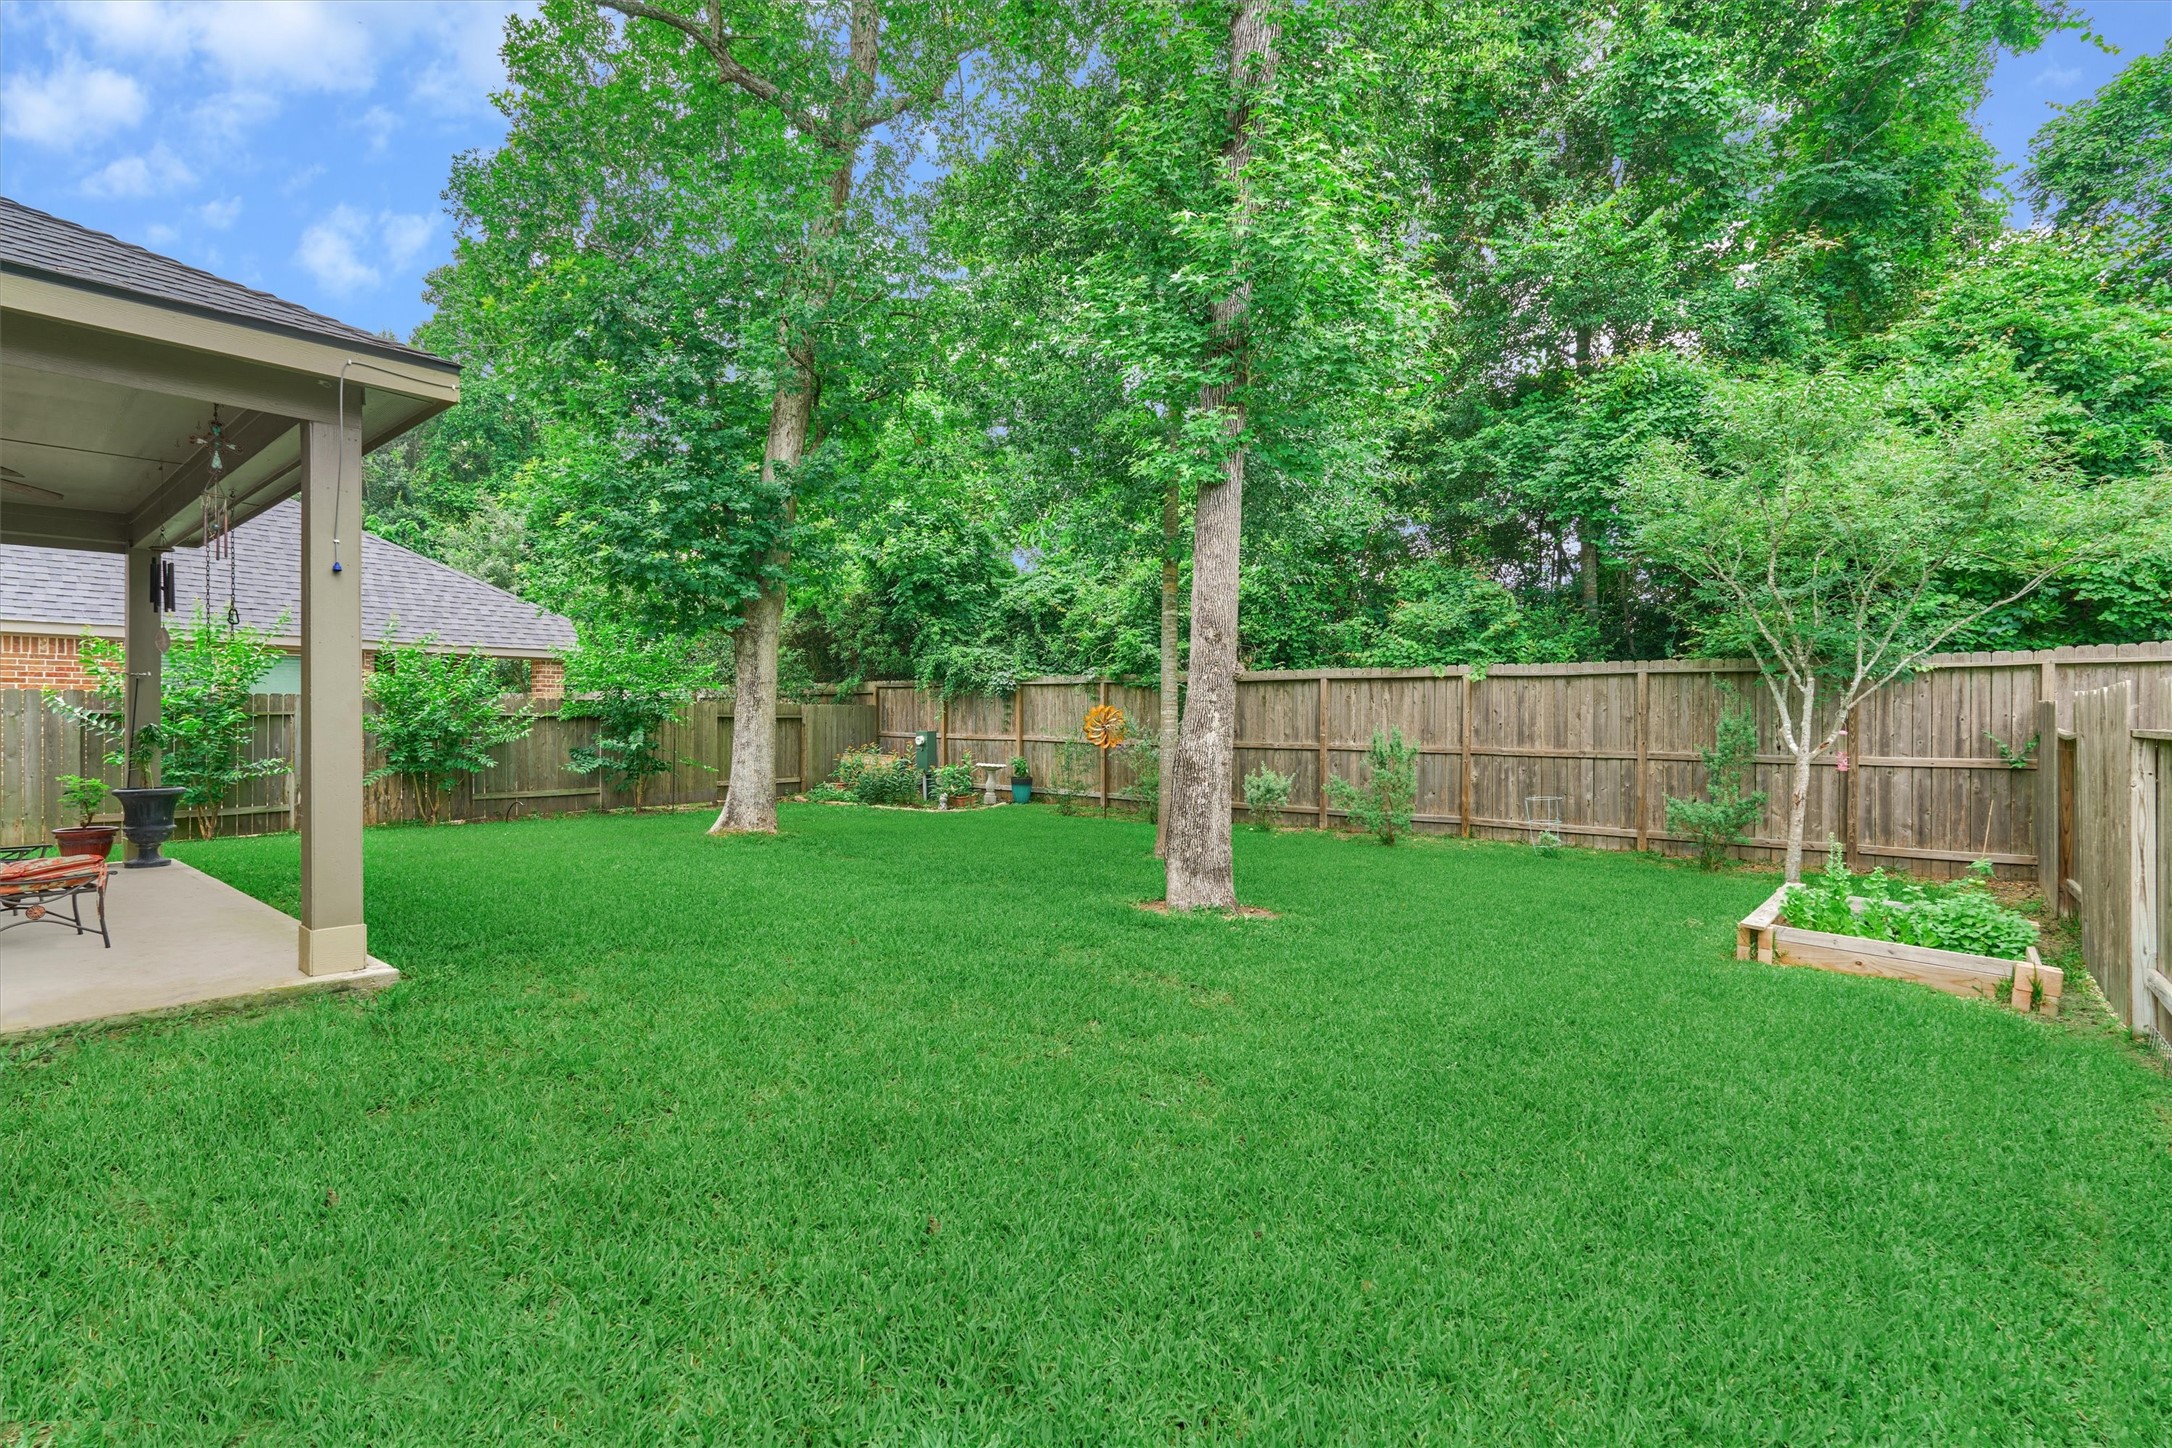 Here we see another view of the back patio. Note the roof was replaced in 2019 and the front and back yard are fully sprinklered.